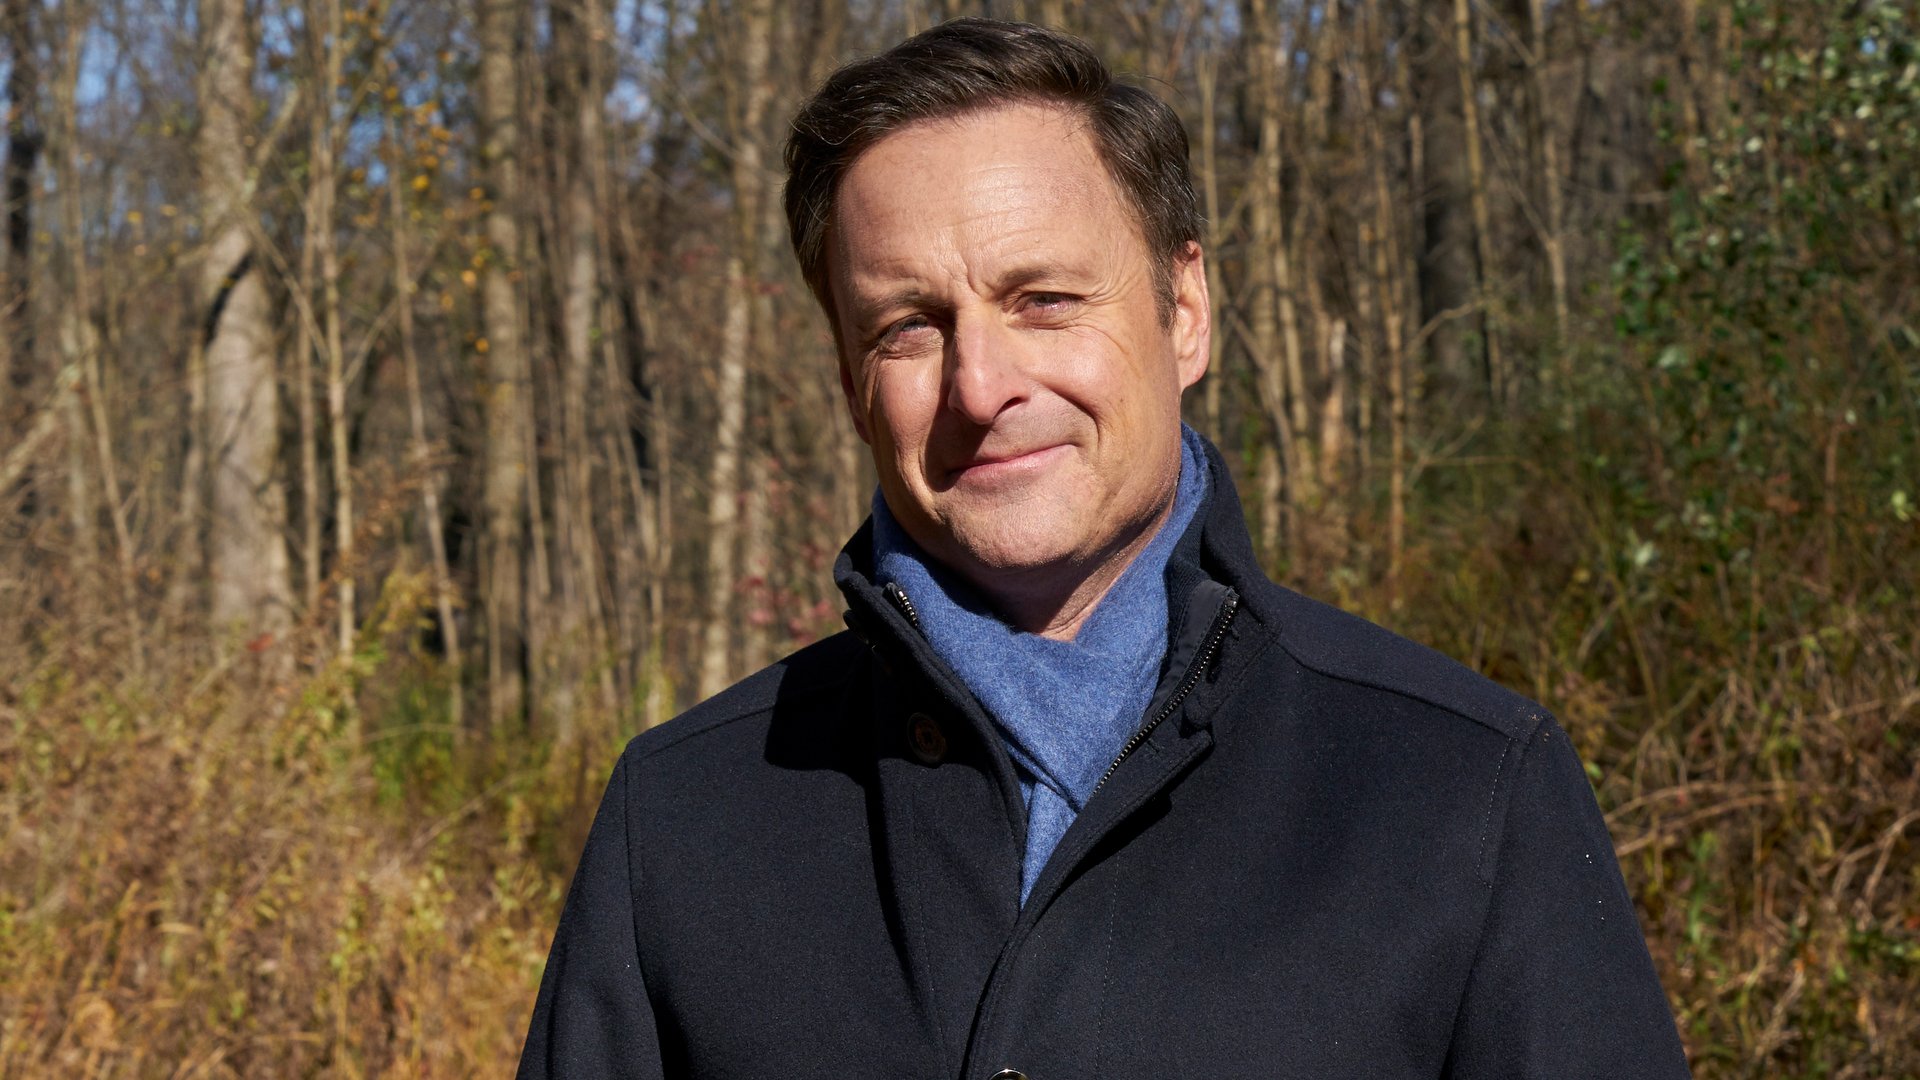 Chris Harrison, host of 'The Bachelorette,' on set of 'The Bachelor' in the woods